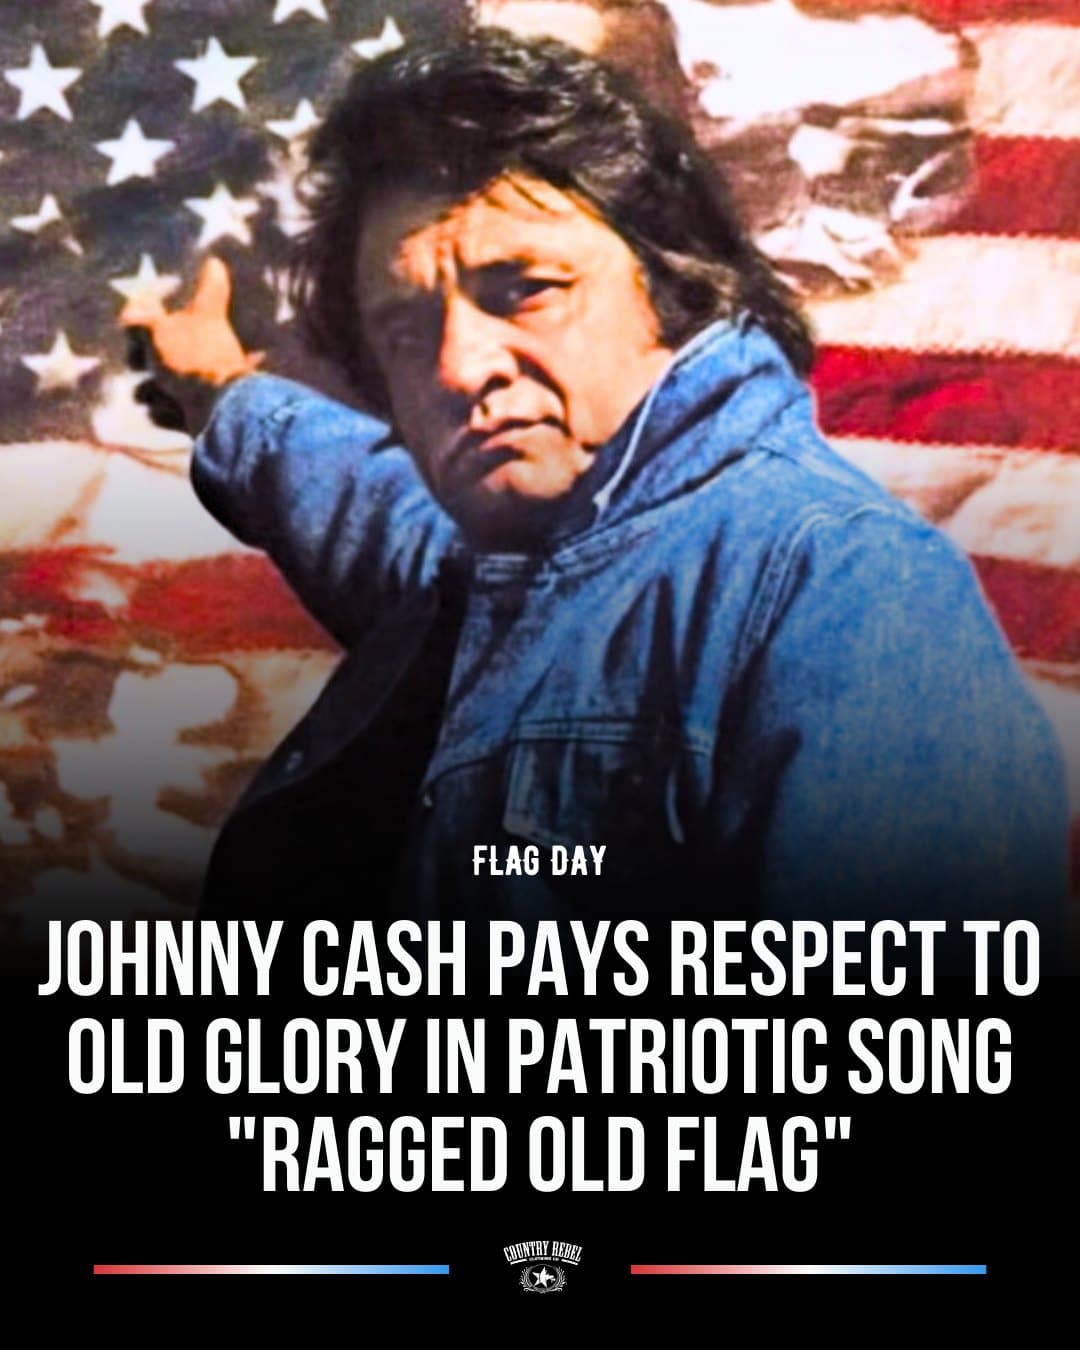 Johnny Cash Shows Patriotism & Respect For Old Glory In “Ragged Old Flag”